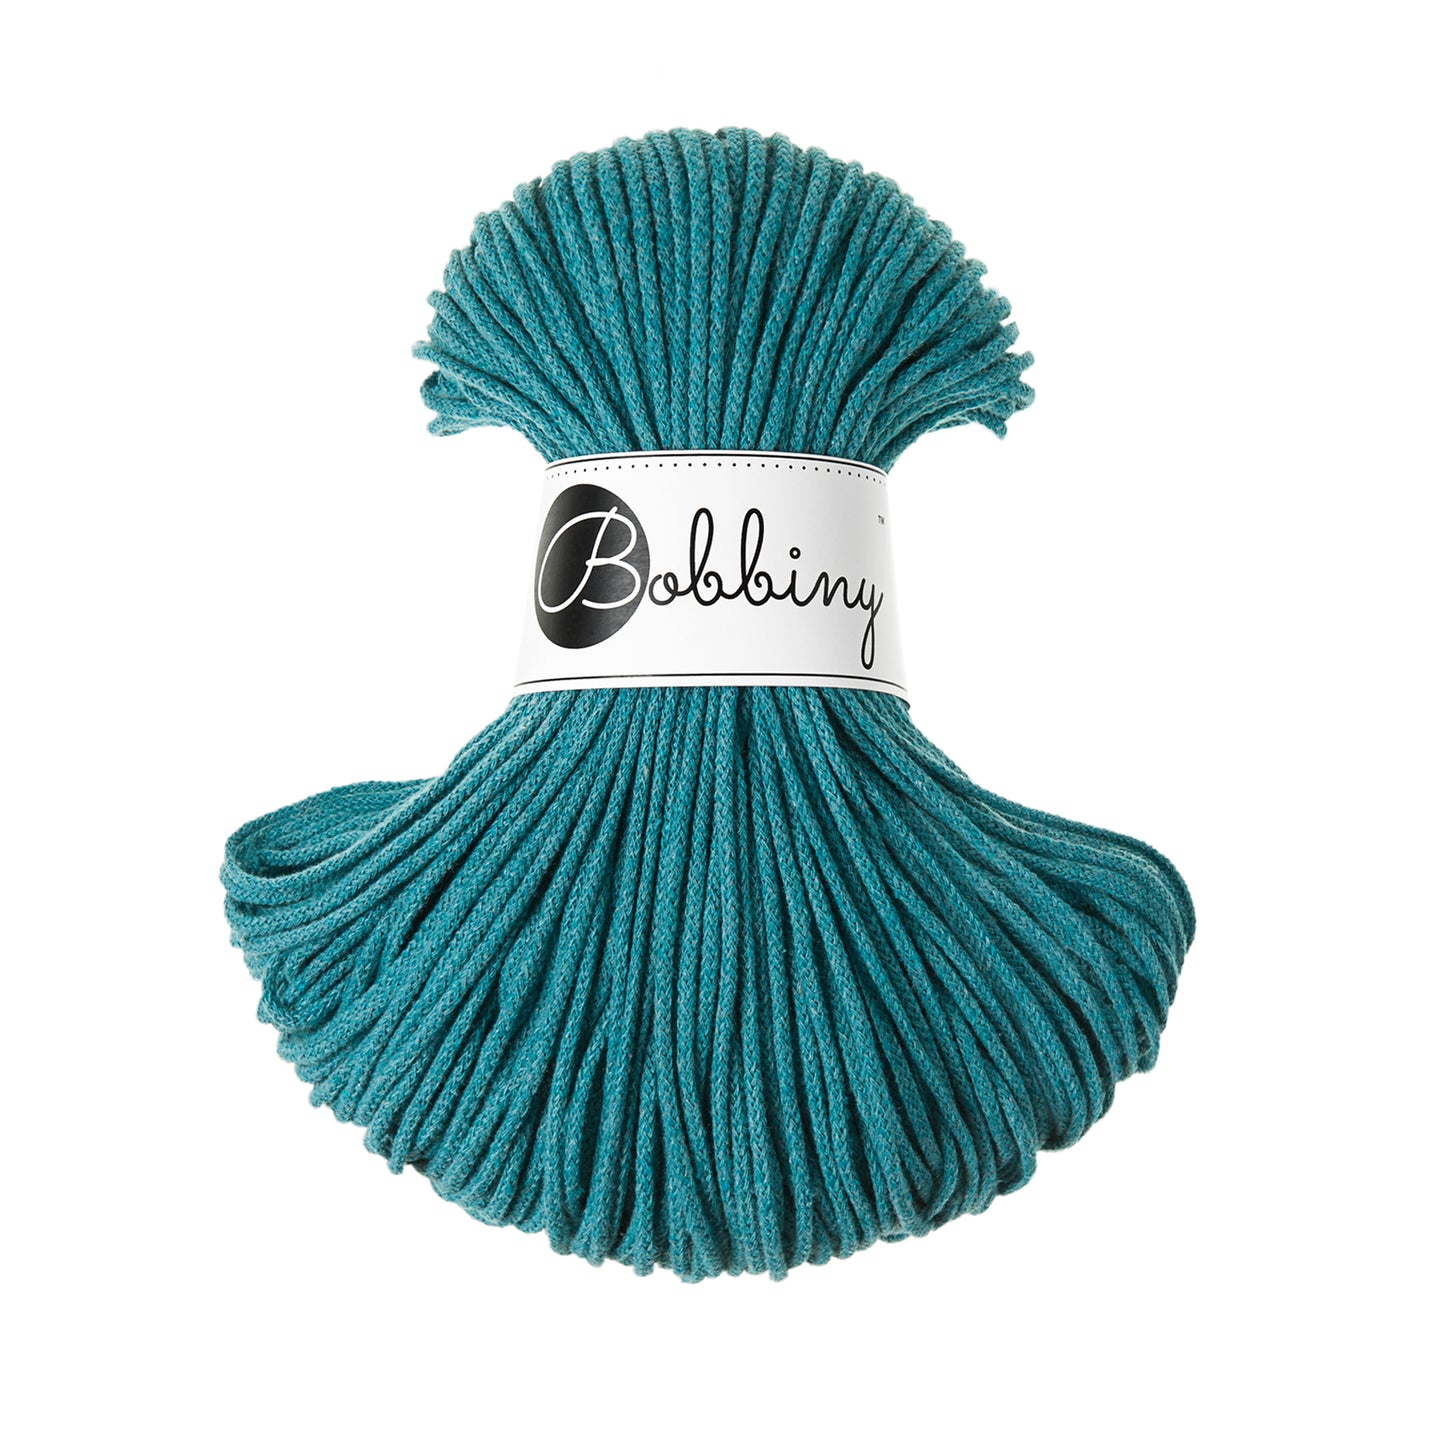 TEAL Braided cord 3mm